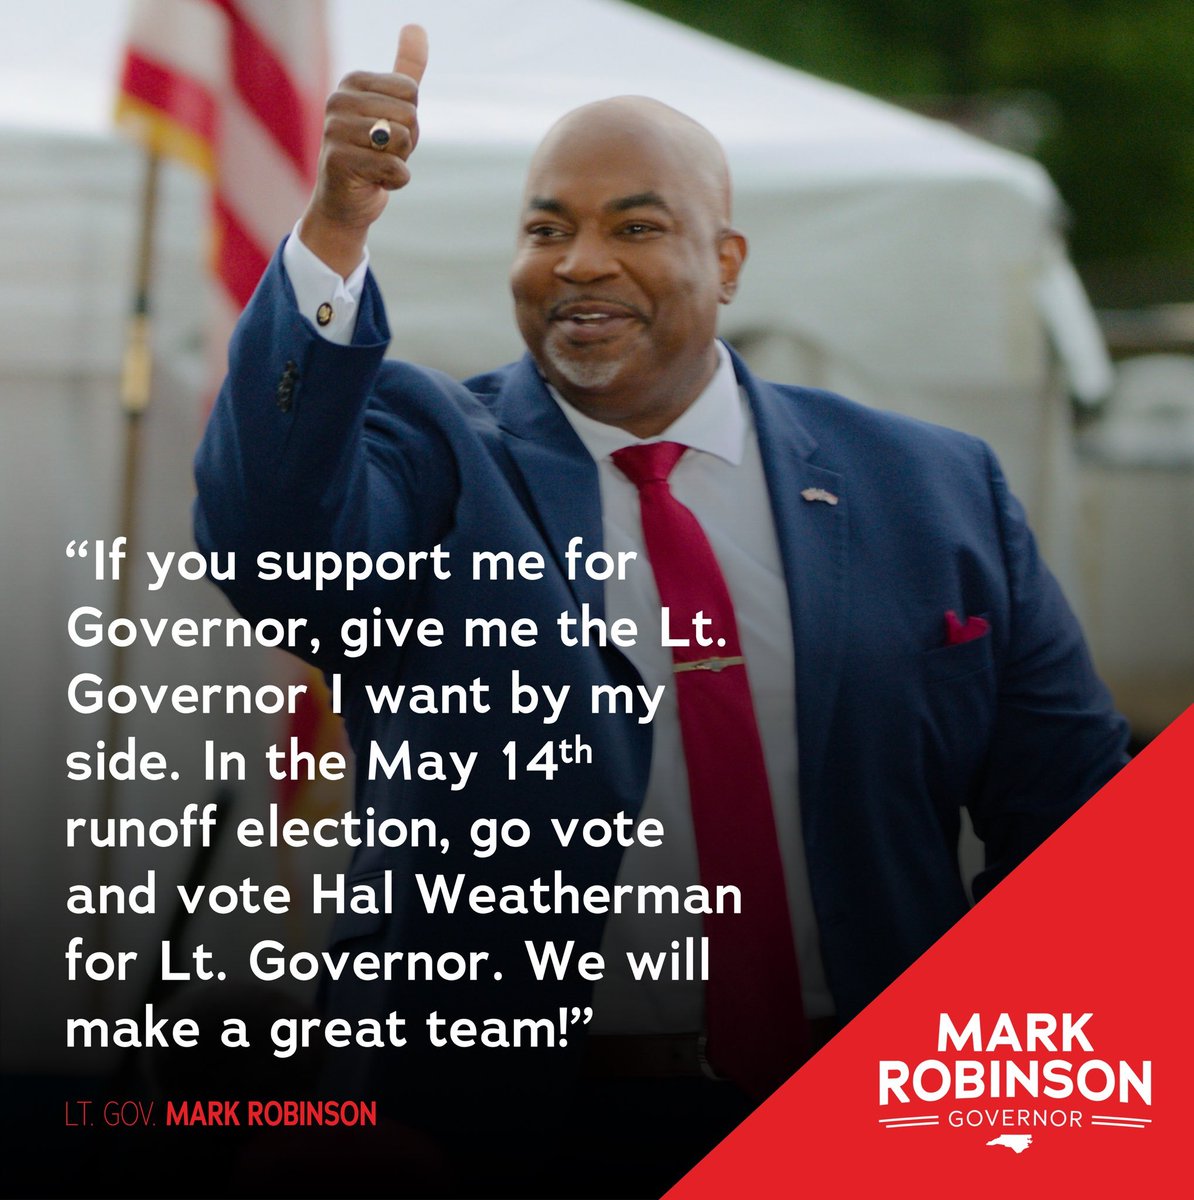 Folks, today is Election Day for the primary runoff election. If you haven’t voted yet, please join me in voting for @HalWeathermanNC! Make your plan to vote today here: vt.ncsbe.gov/PPLkup/ #ncpol #ncgov `